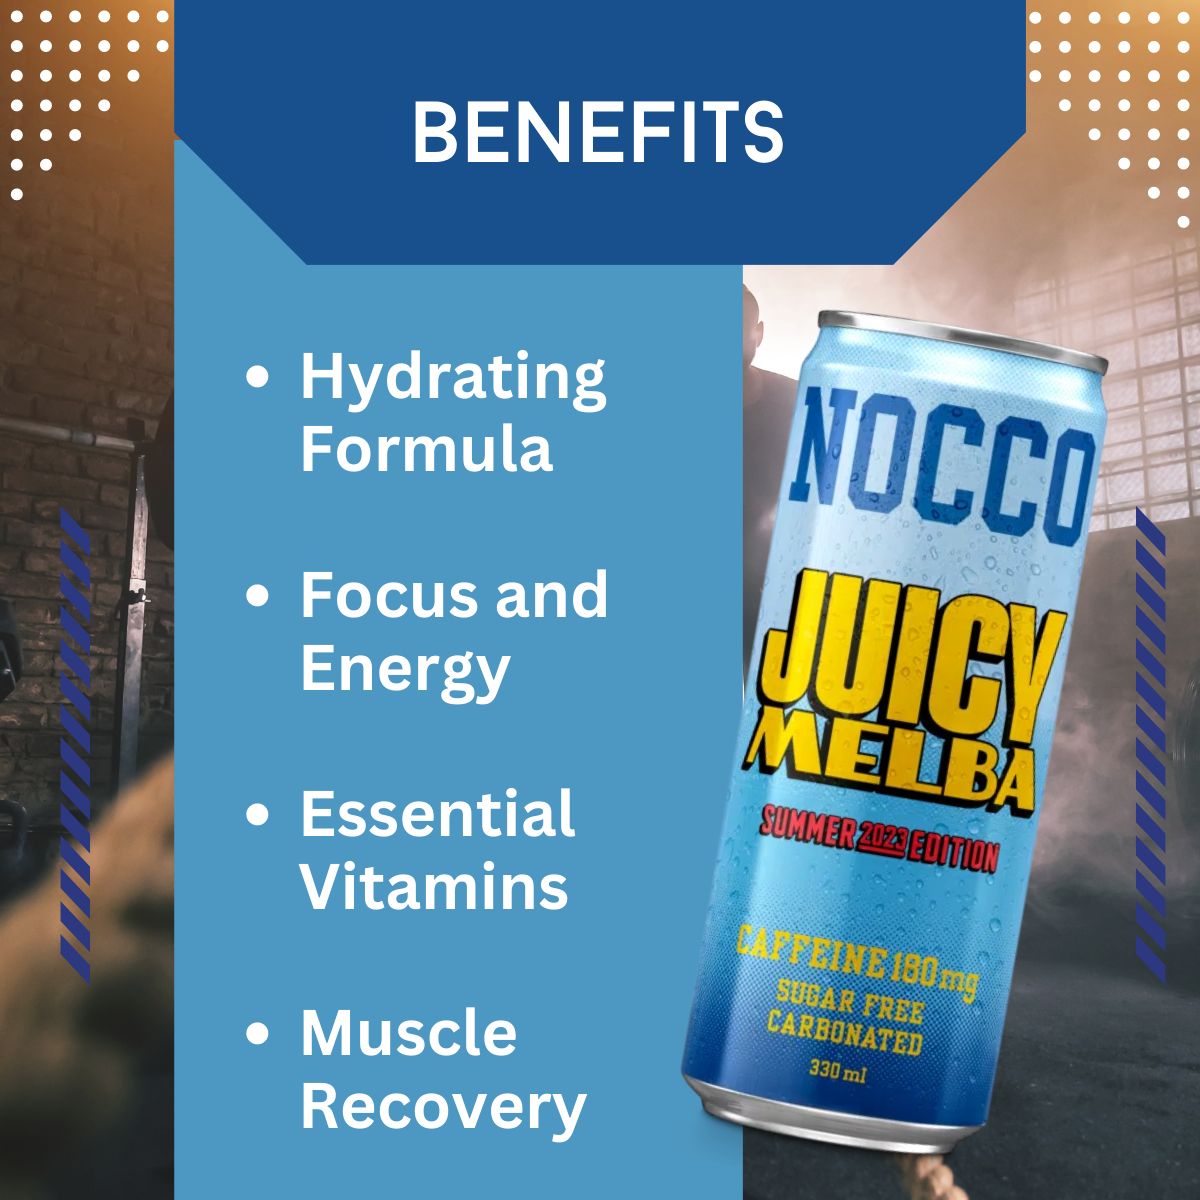 Nocco, Energy Drink, 330ml, 6-24 Cans - benefit